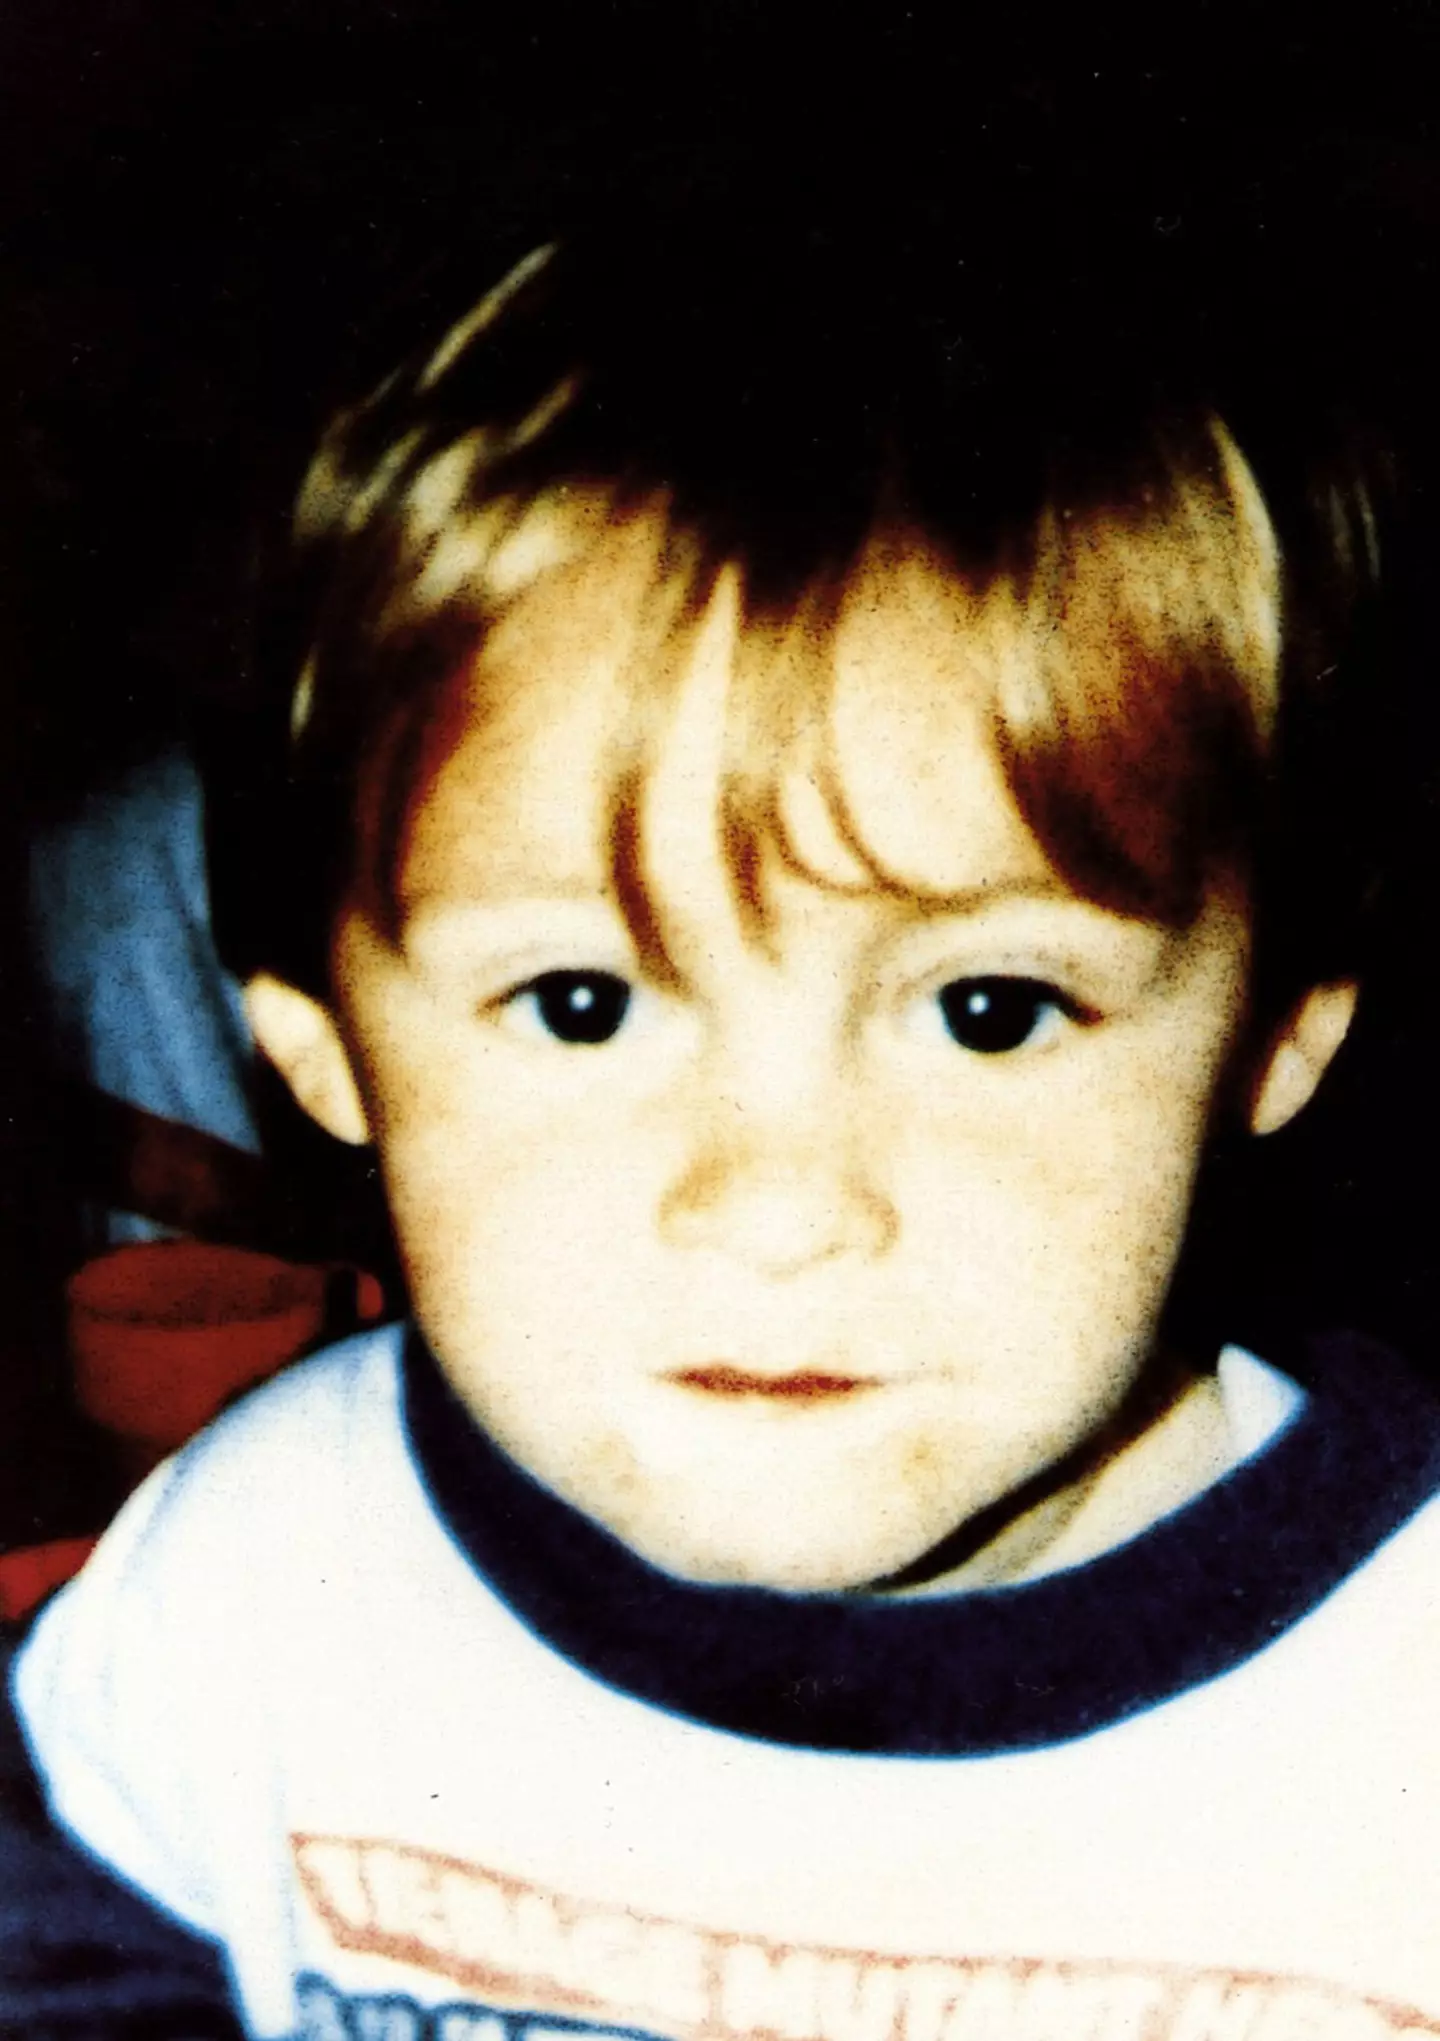 James Bulger was just two-years-old when he was tortured and killed.